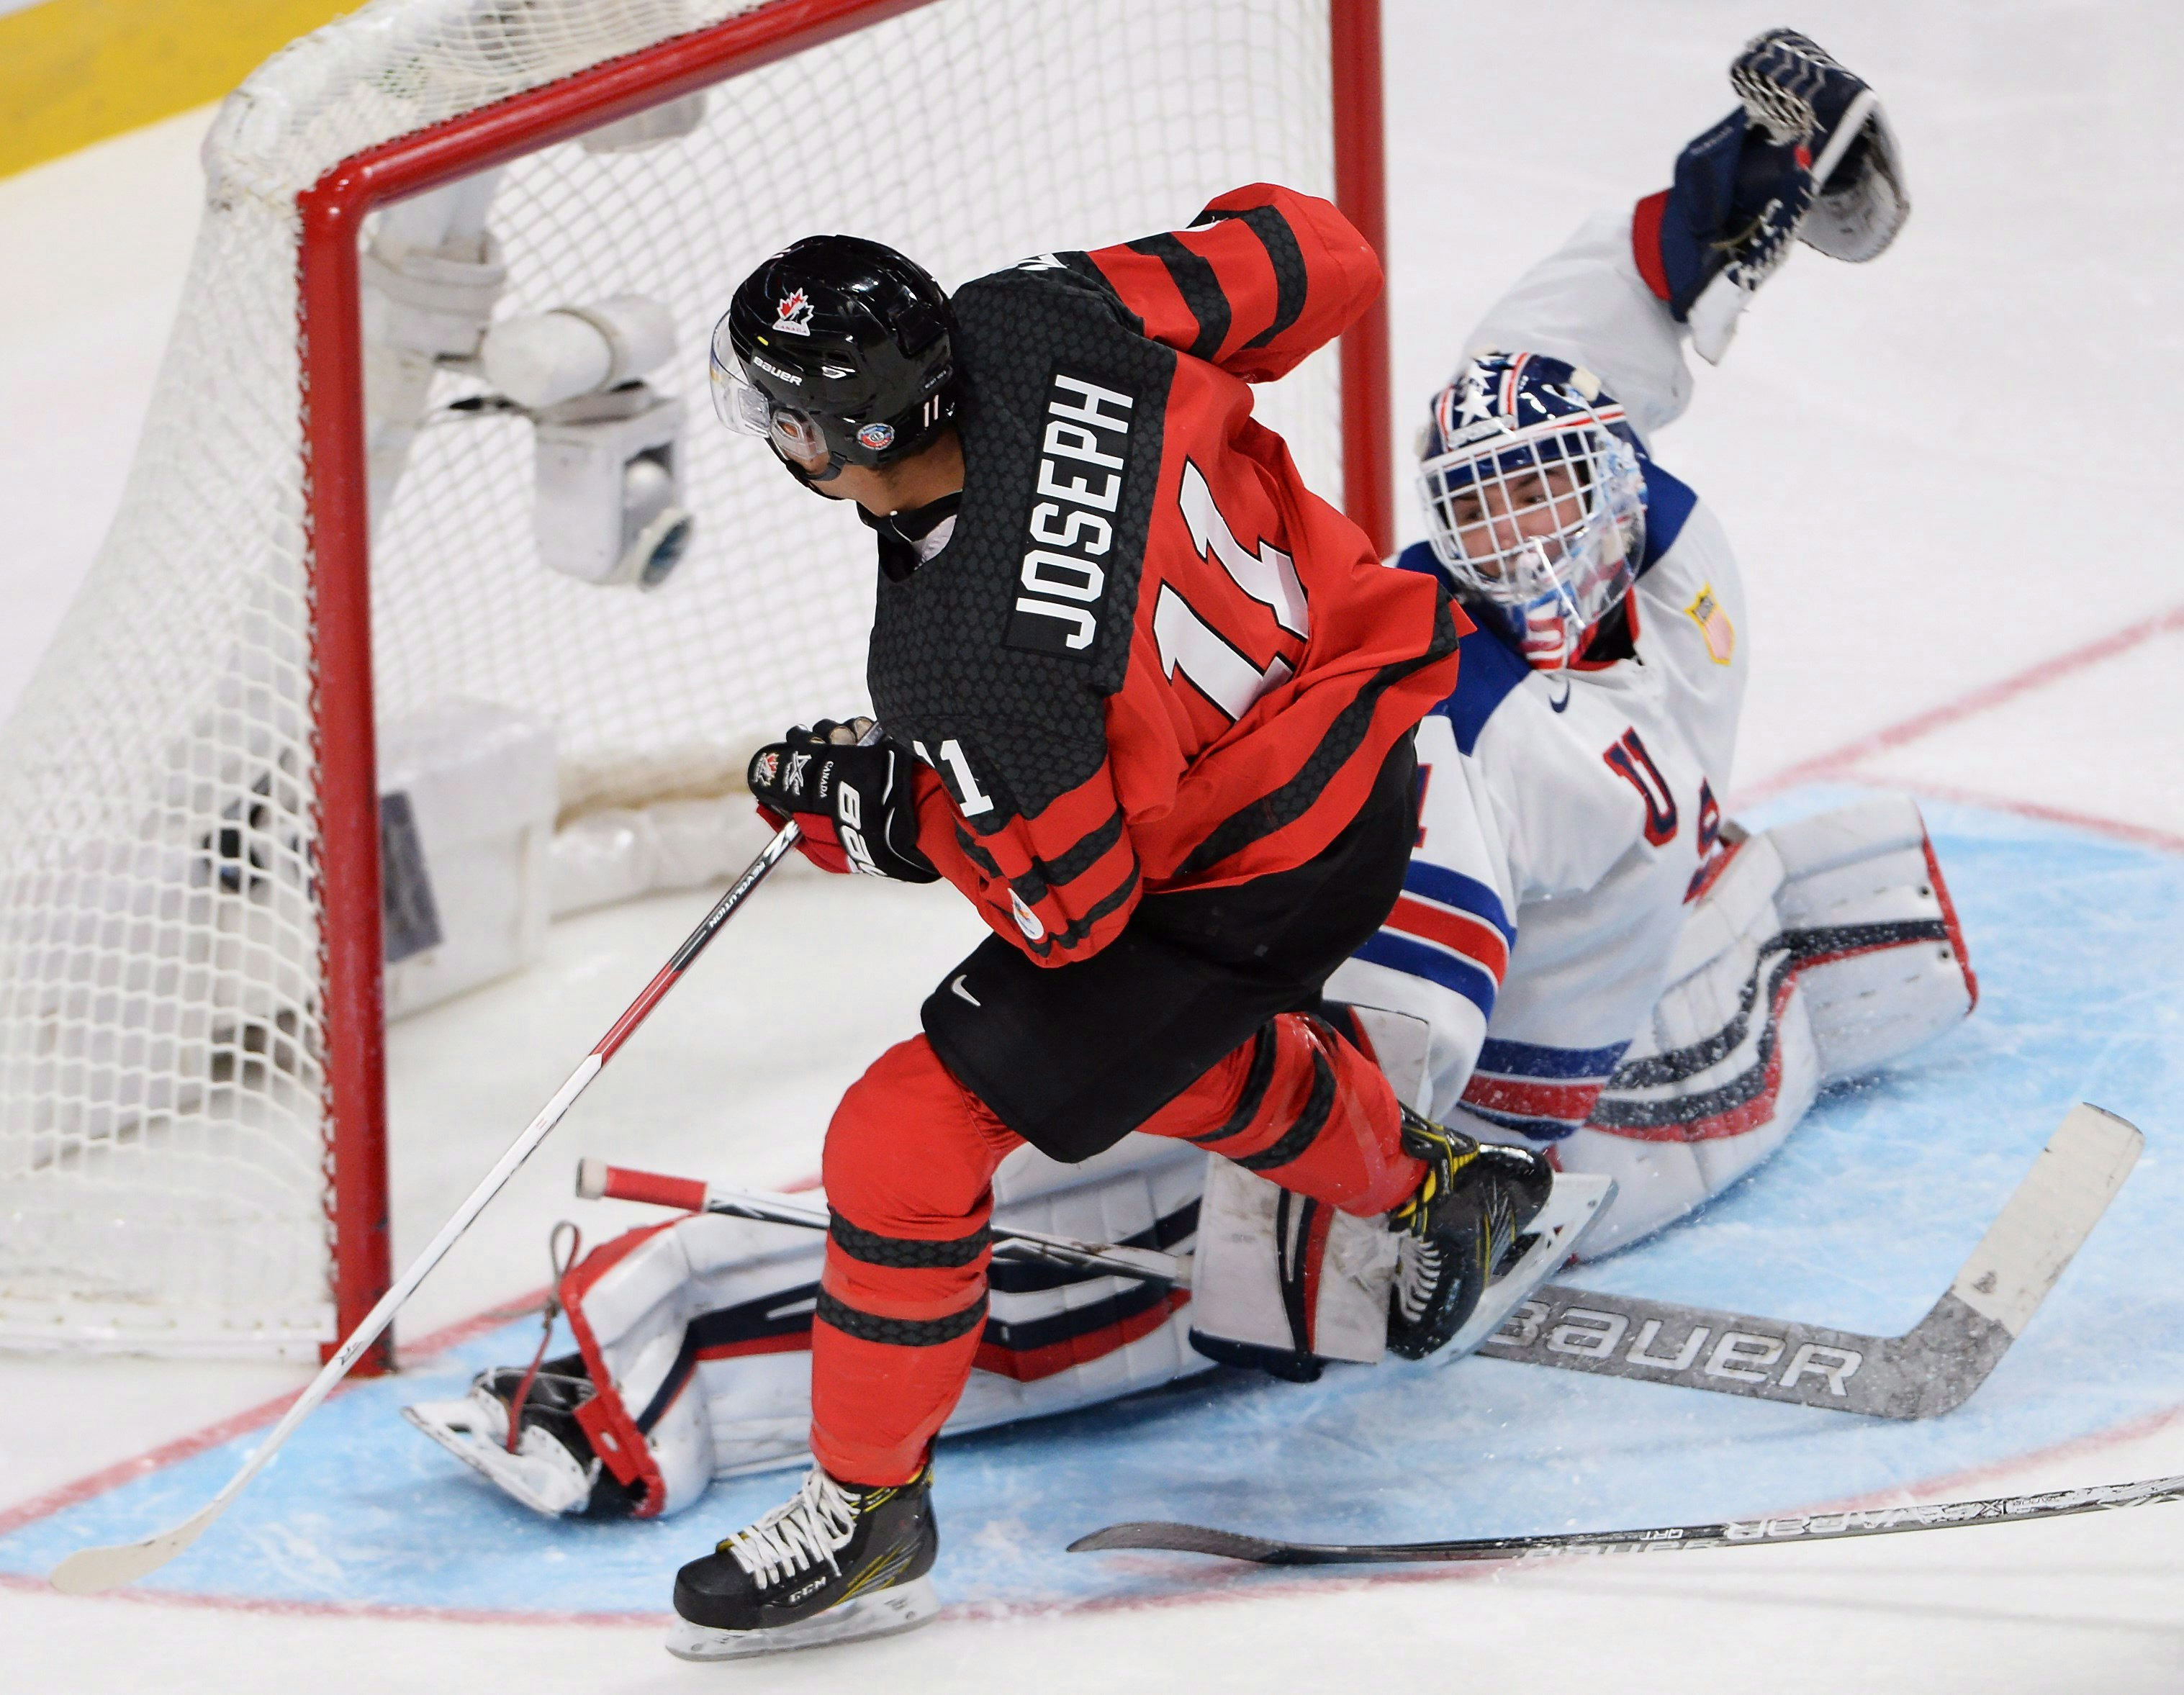 11 Million Canadians Watch the Instant Classic World Juniors Gold Medal Game on TSN and RDS